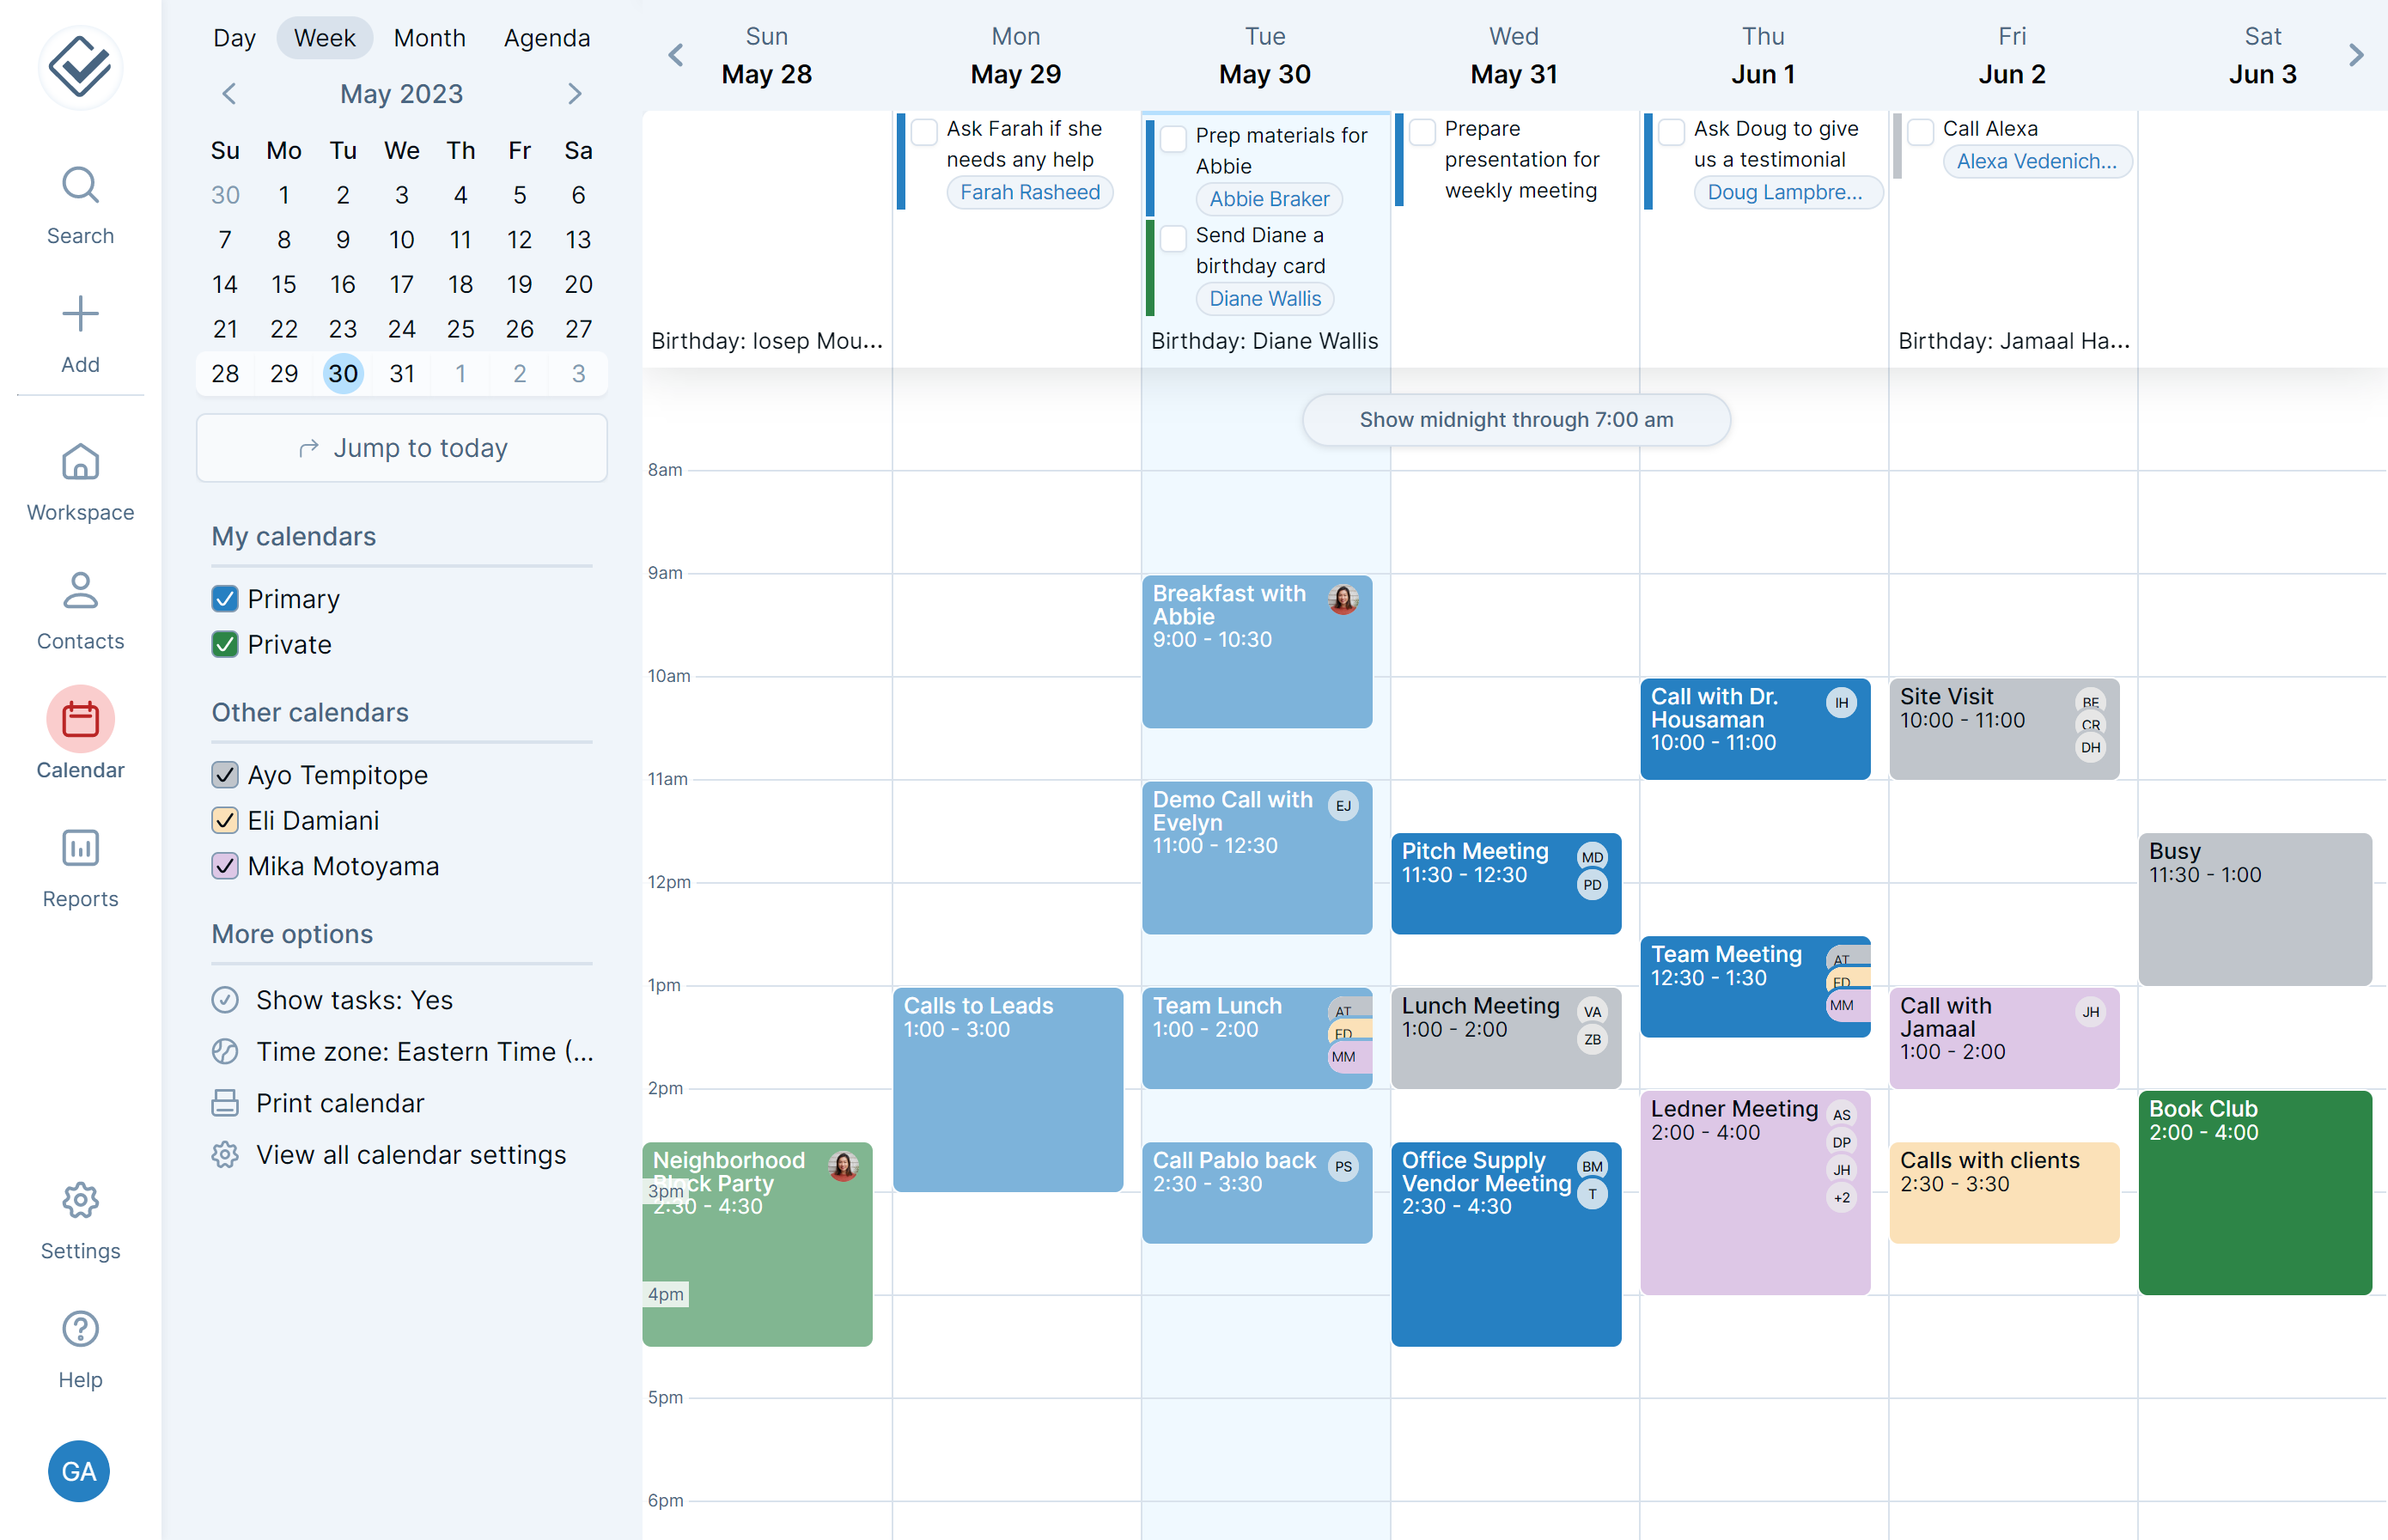 Less Annoying CRM Software - Calendar - private, shared, and team calendars for everyone to work together, delegate tasks and events to one another, and collaborate. Also syncs with your existing Google and Outlook calendars.